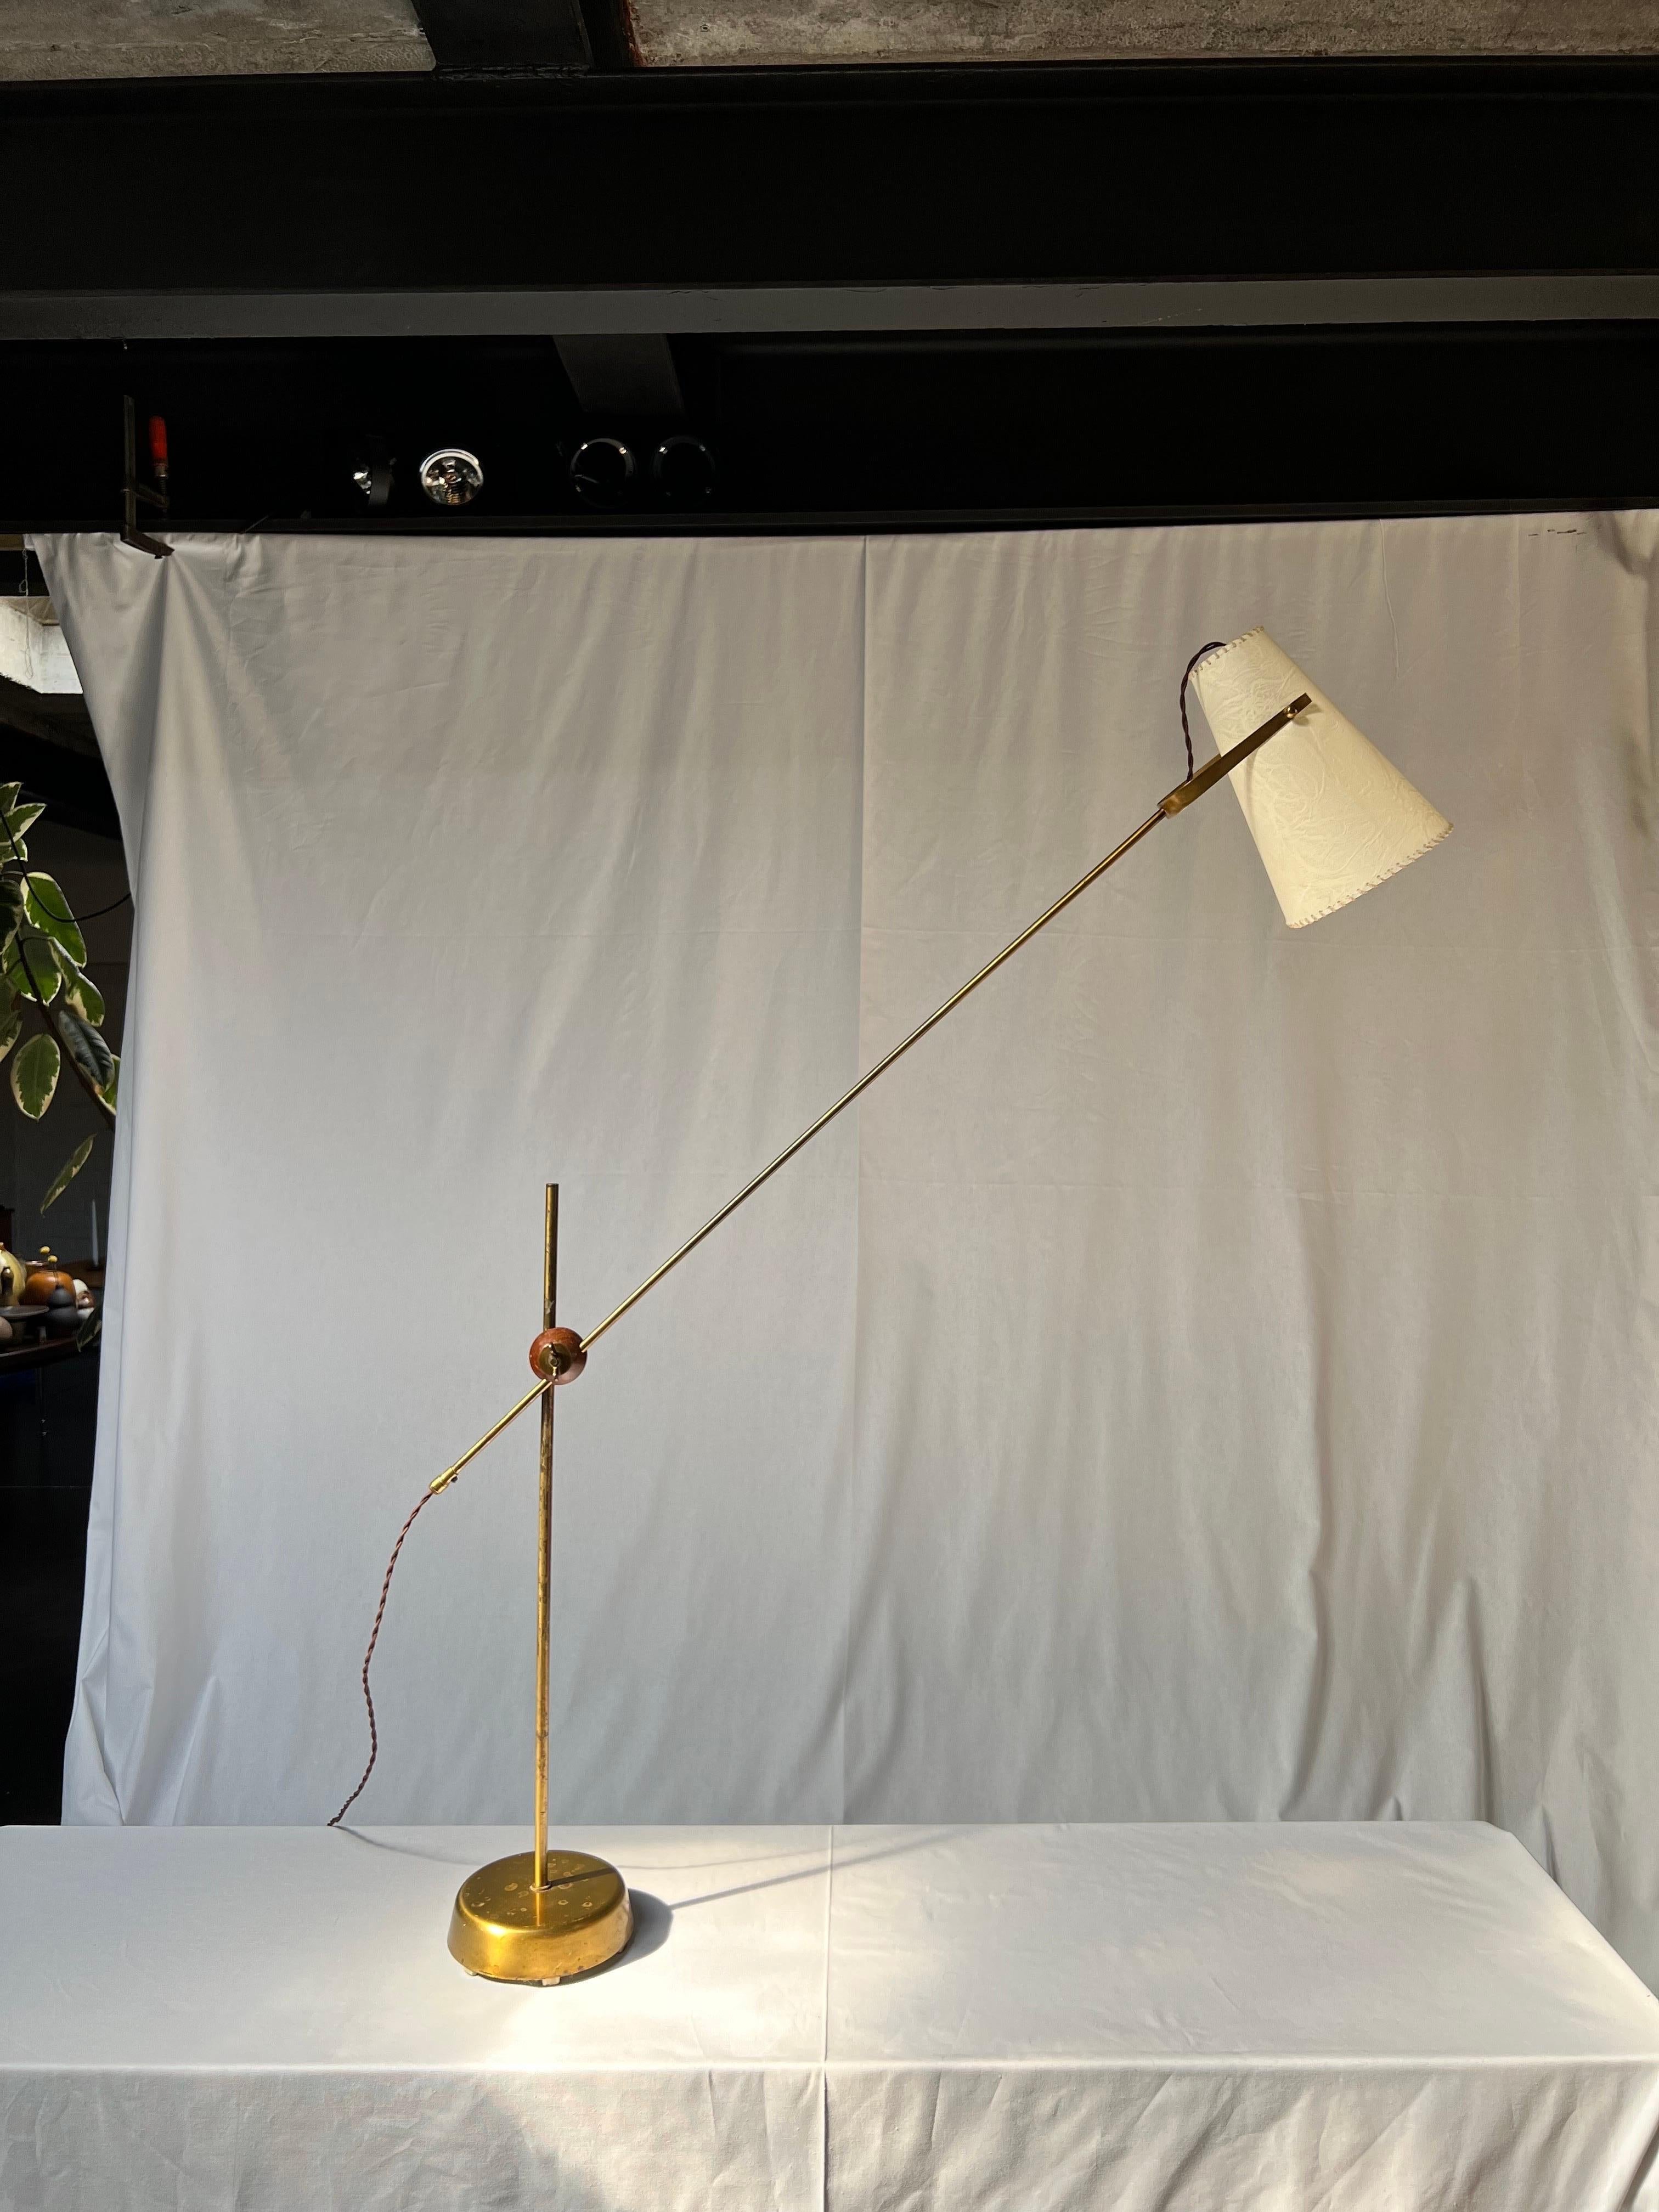 Rare floor lamp by Swedish architect and designer Hans Bergström. This is very hard to find. Made of patinated brass tubes that aged beautifully fixed by a brass screw in the middle of a cylinder wooden part. The shade is old but was probably